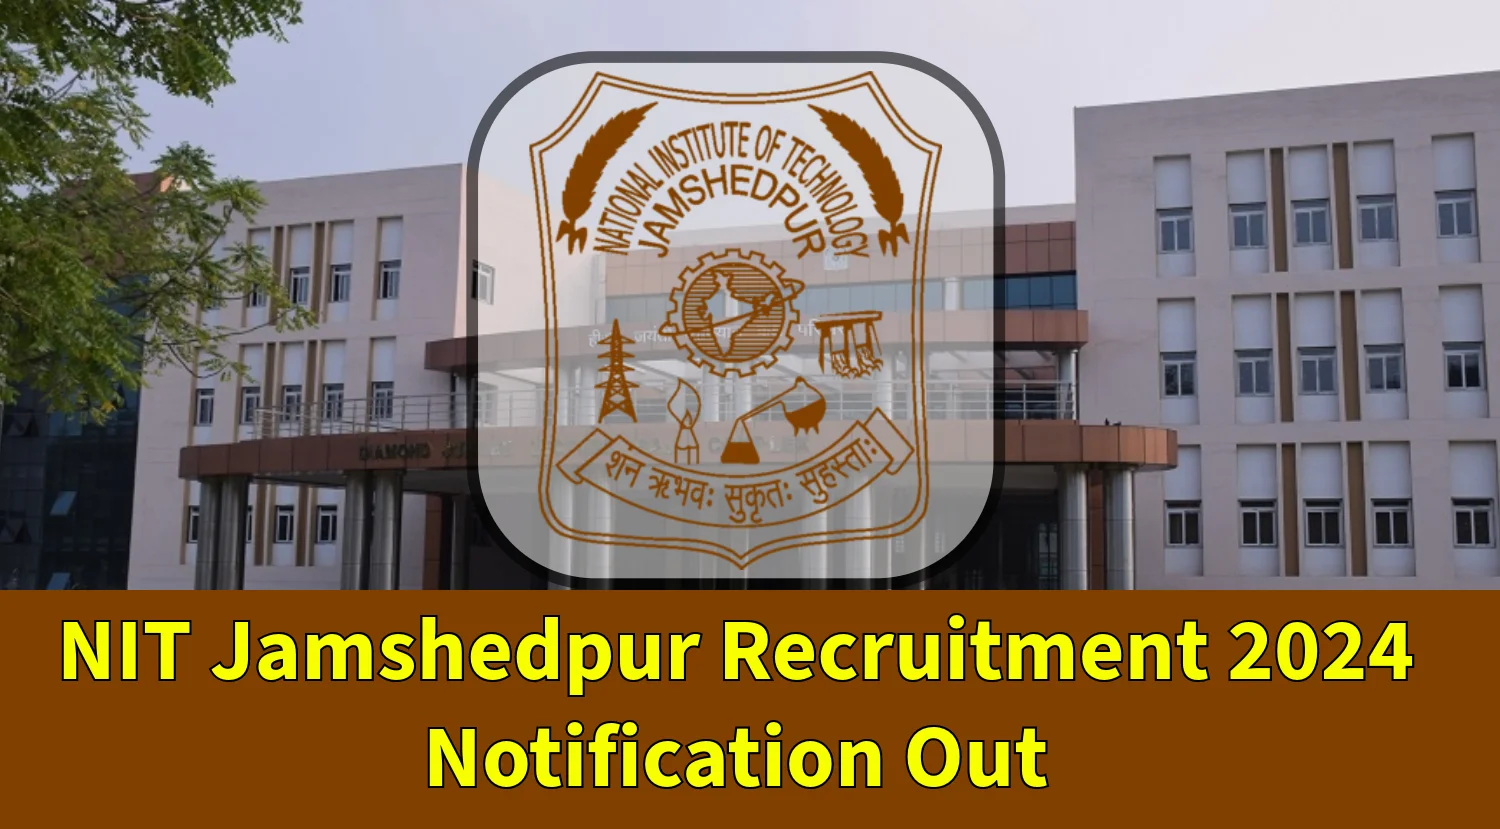 NIT Jamshedpur Recruitment 2024 Notification Out